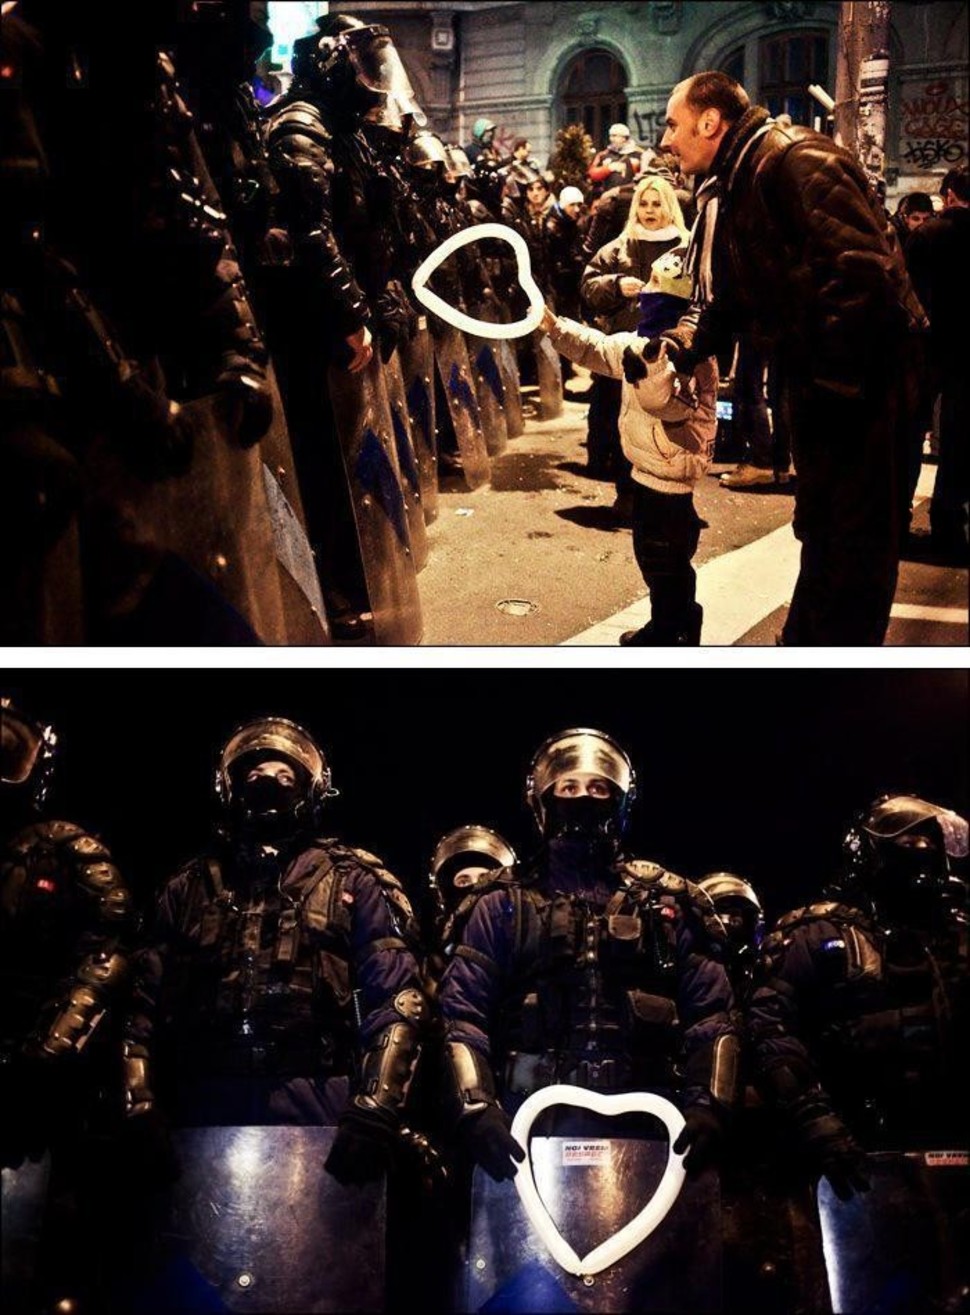 A riot officer accepts a heart-shaped balloon from a young boy in Bucharest, Romania.